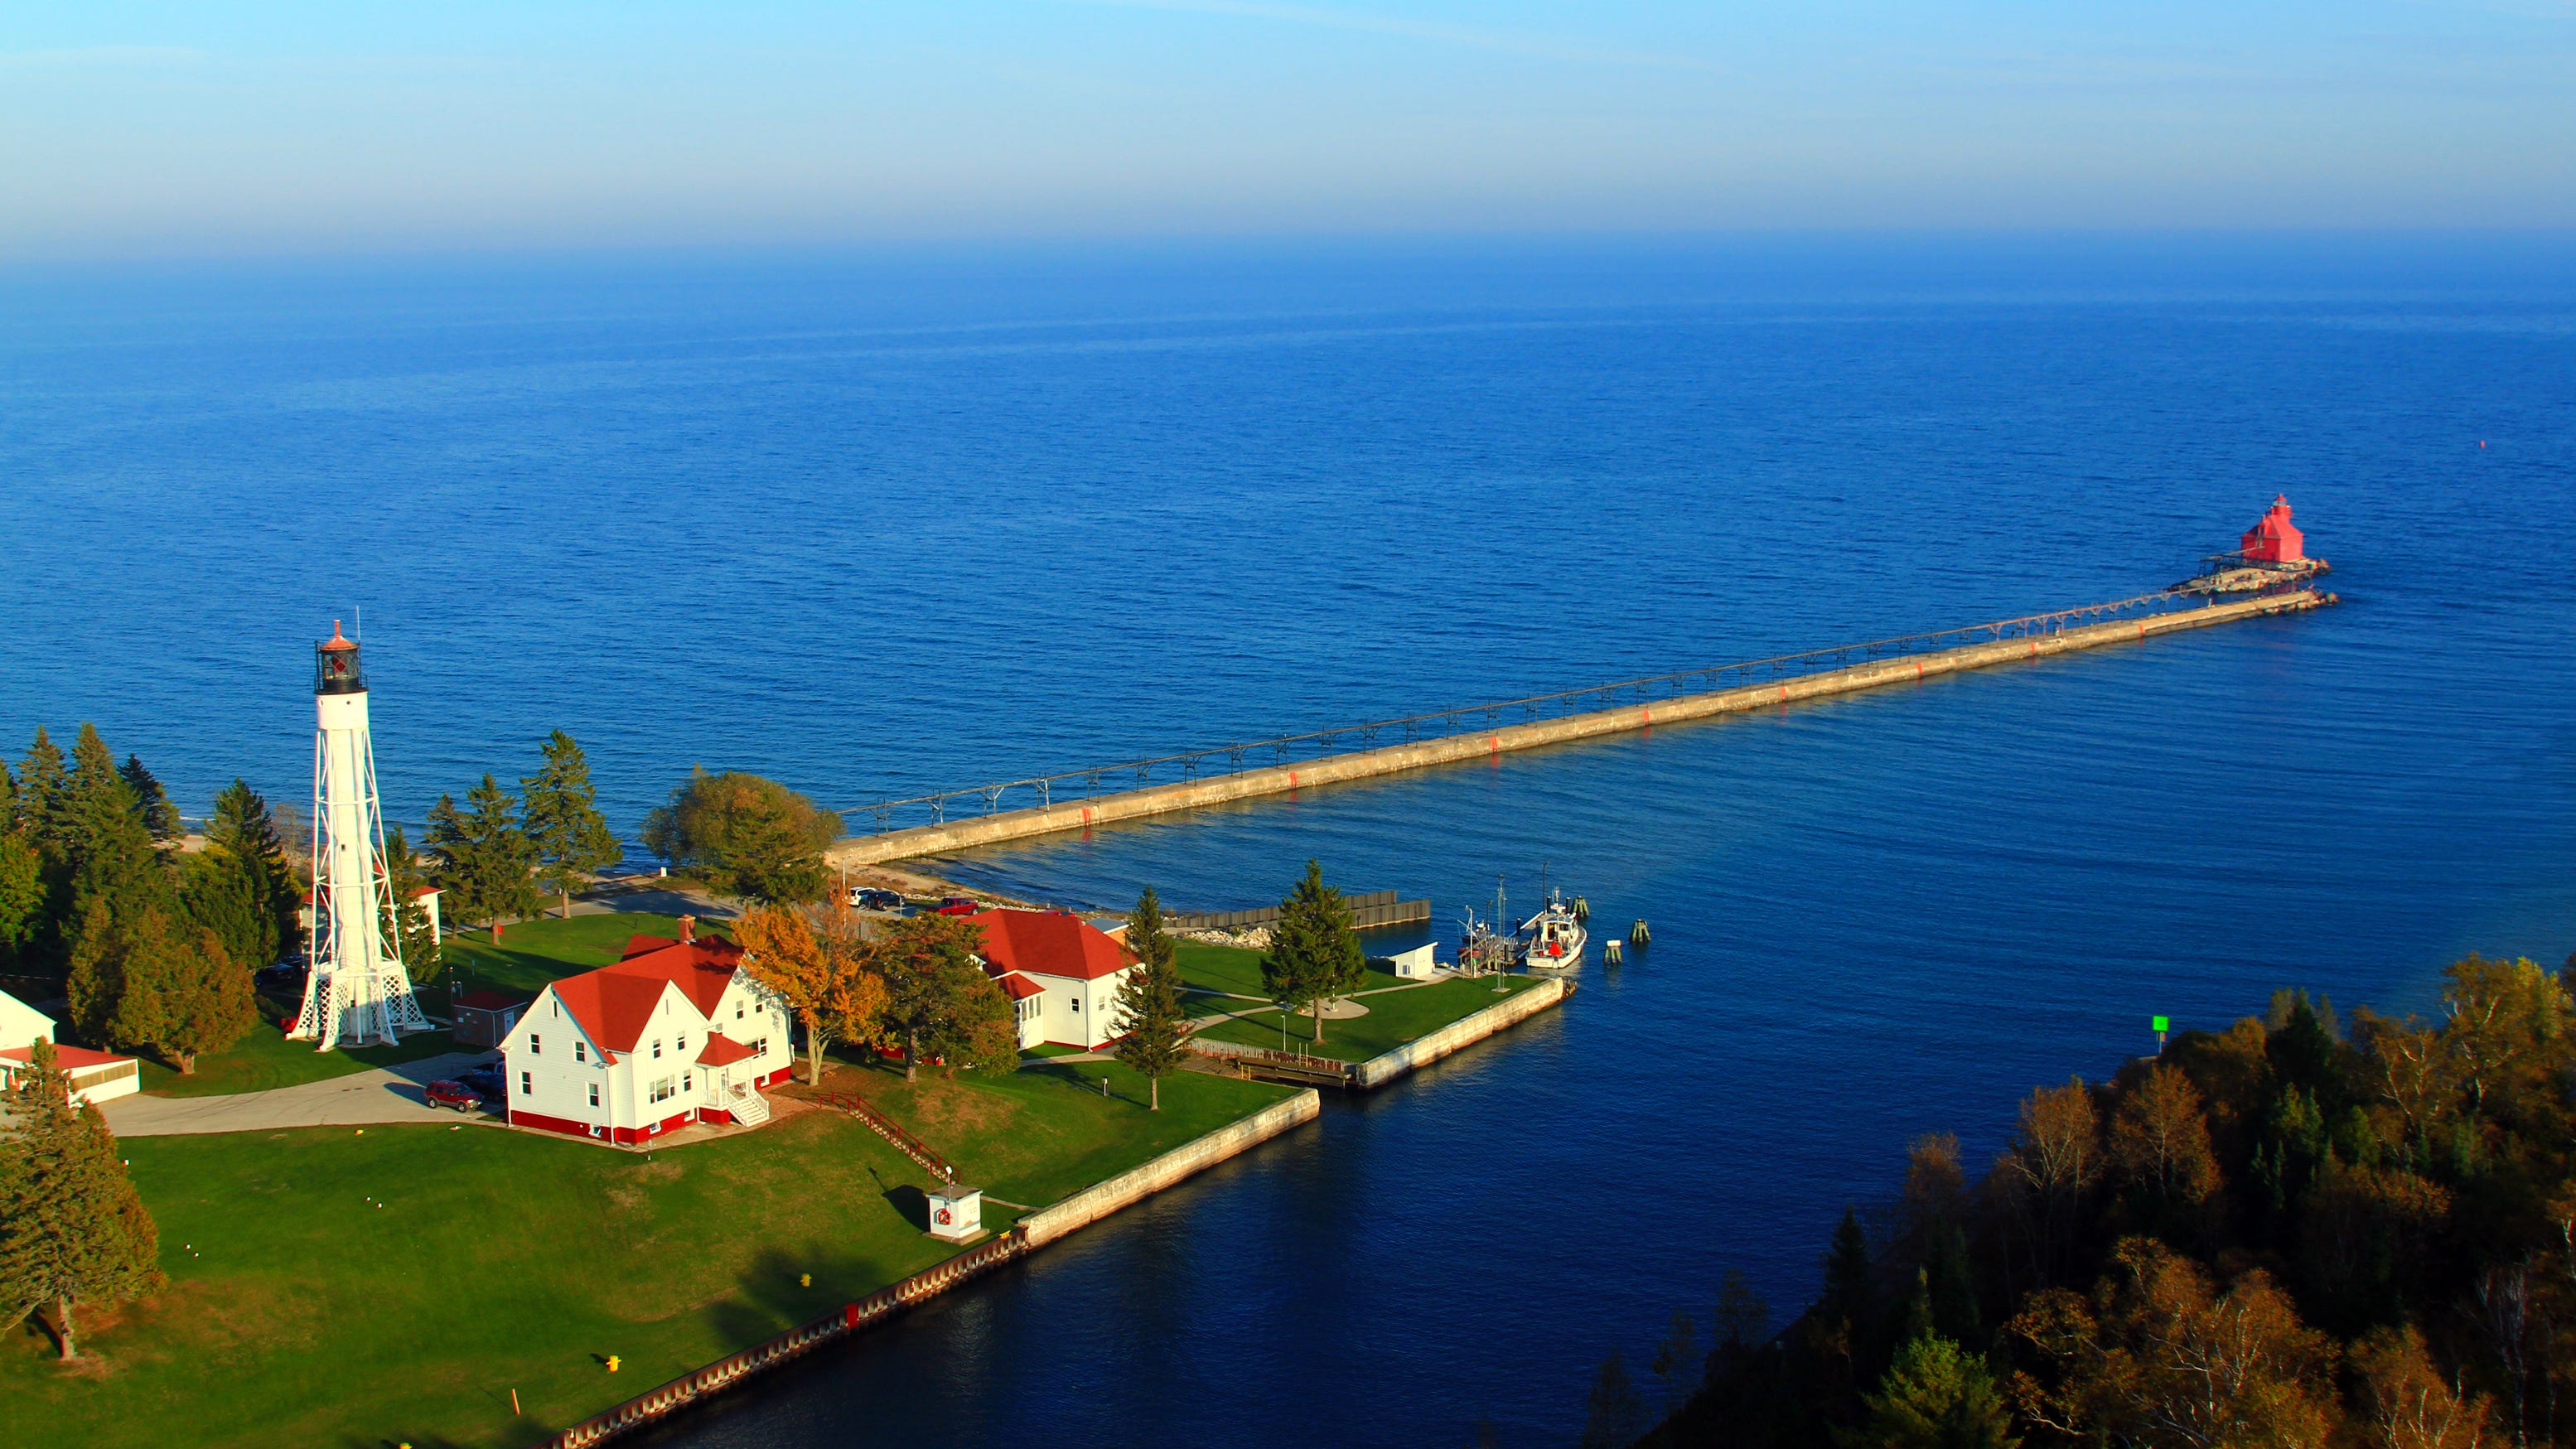 A guide to every town in Door County, from Sturgeon Bay to Egg Harbor